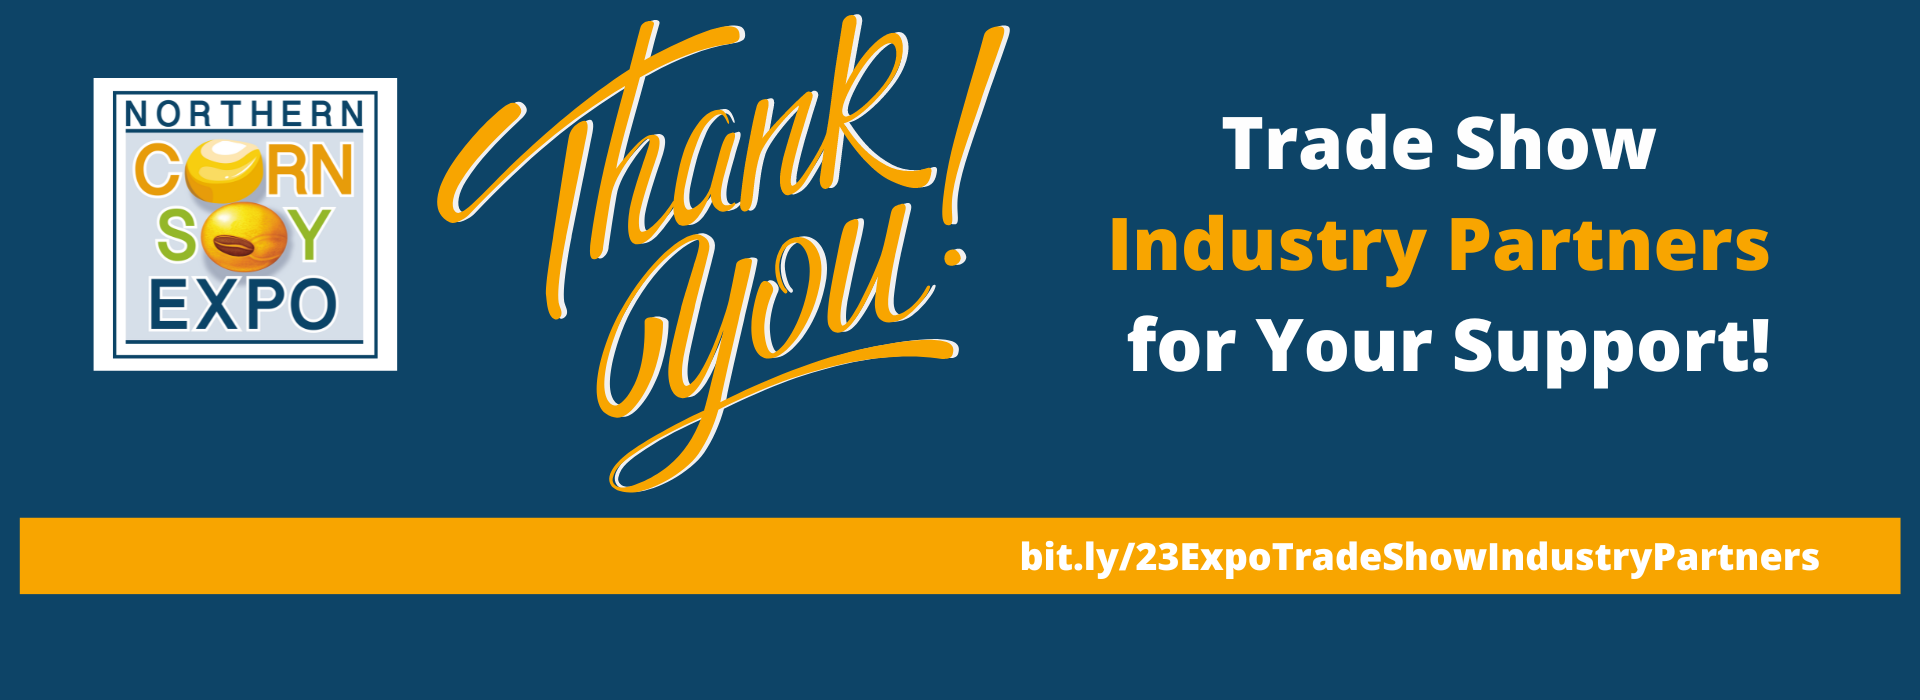 Thank you Industry Partners